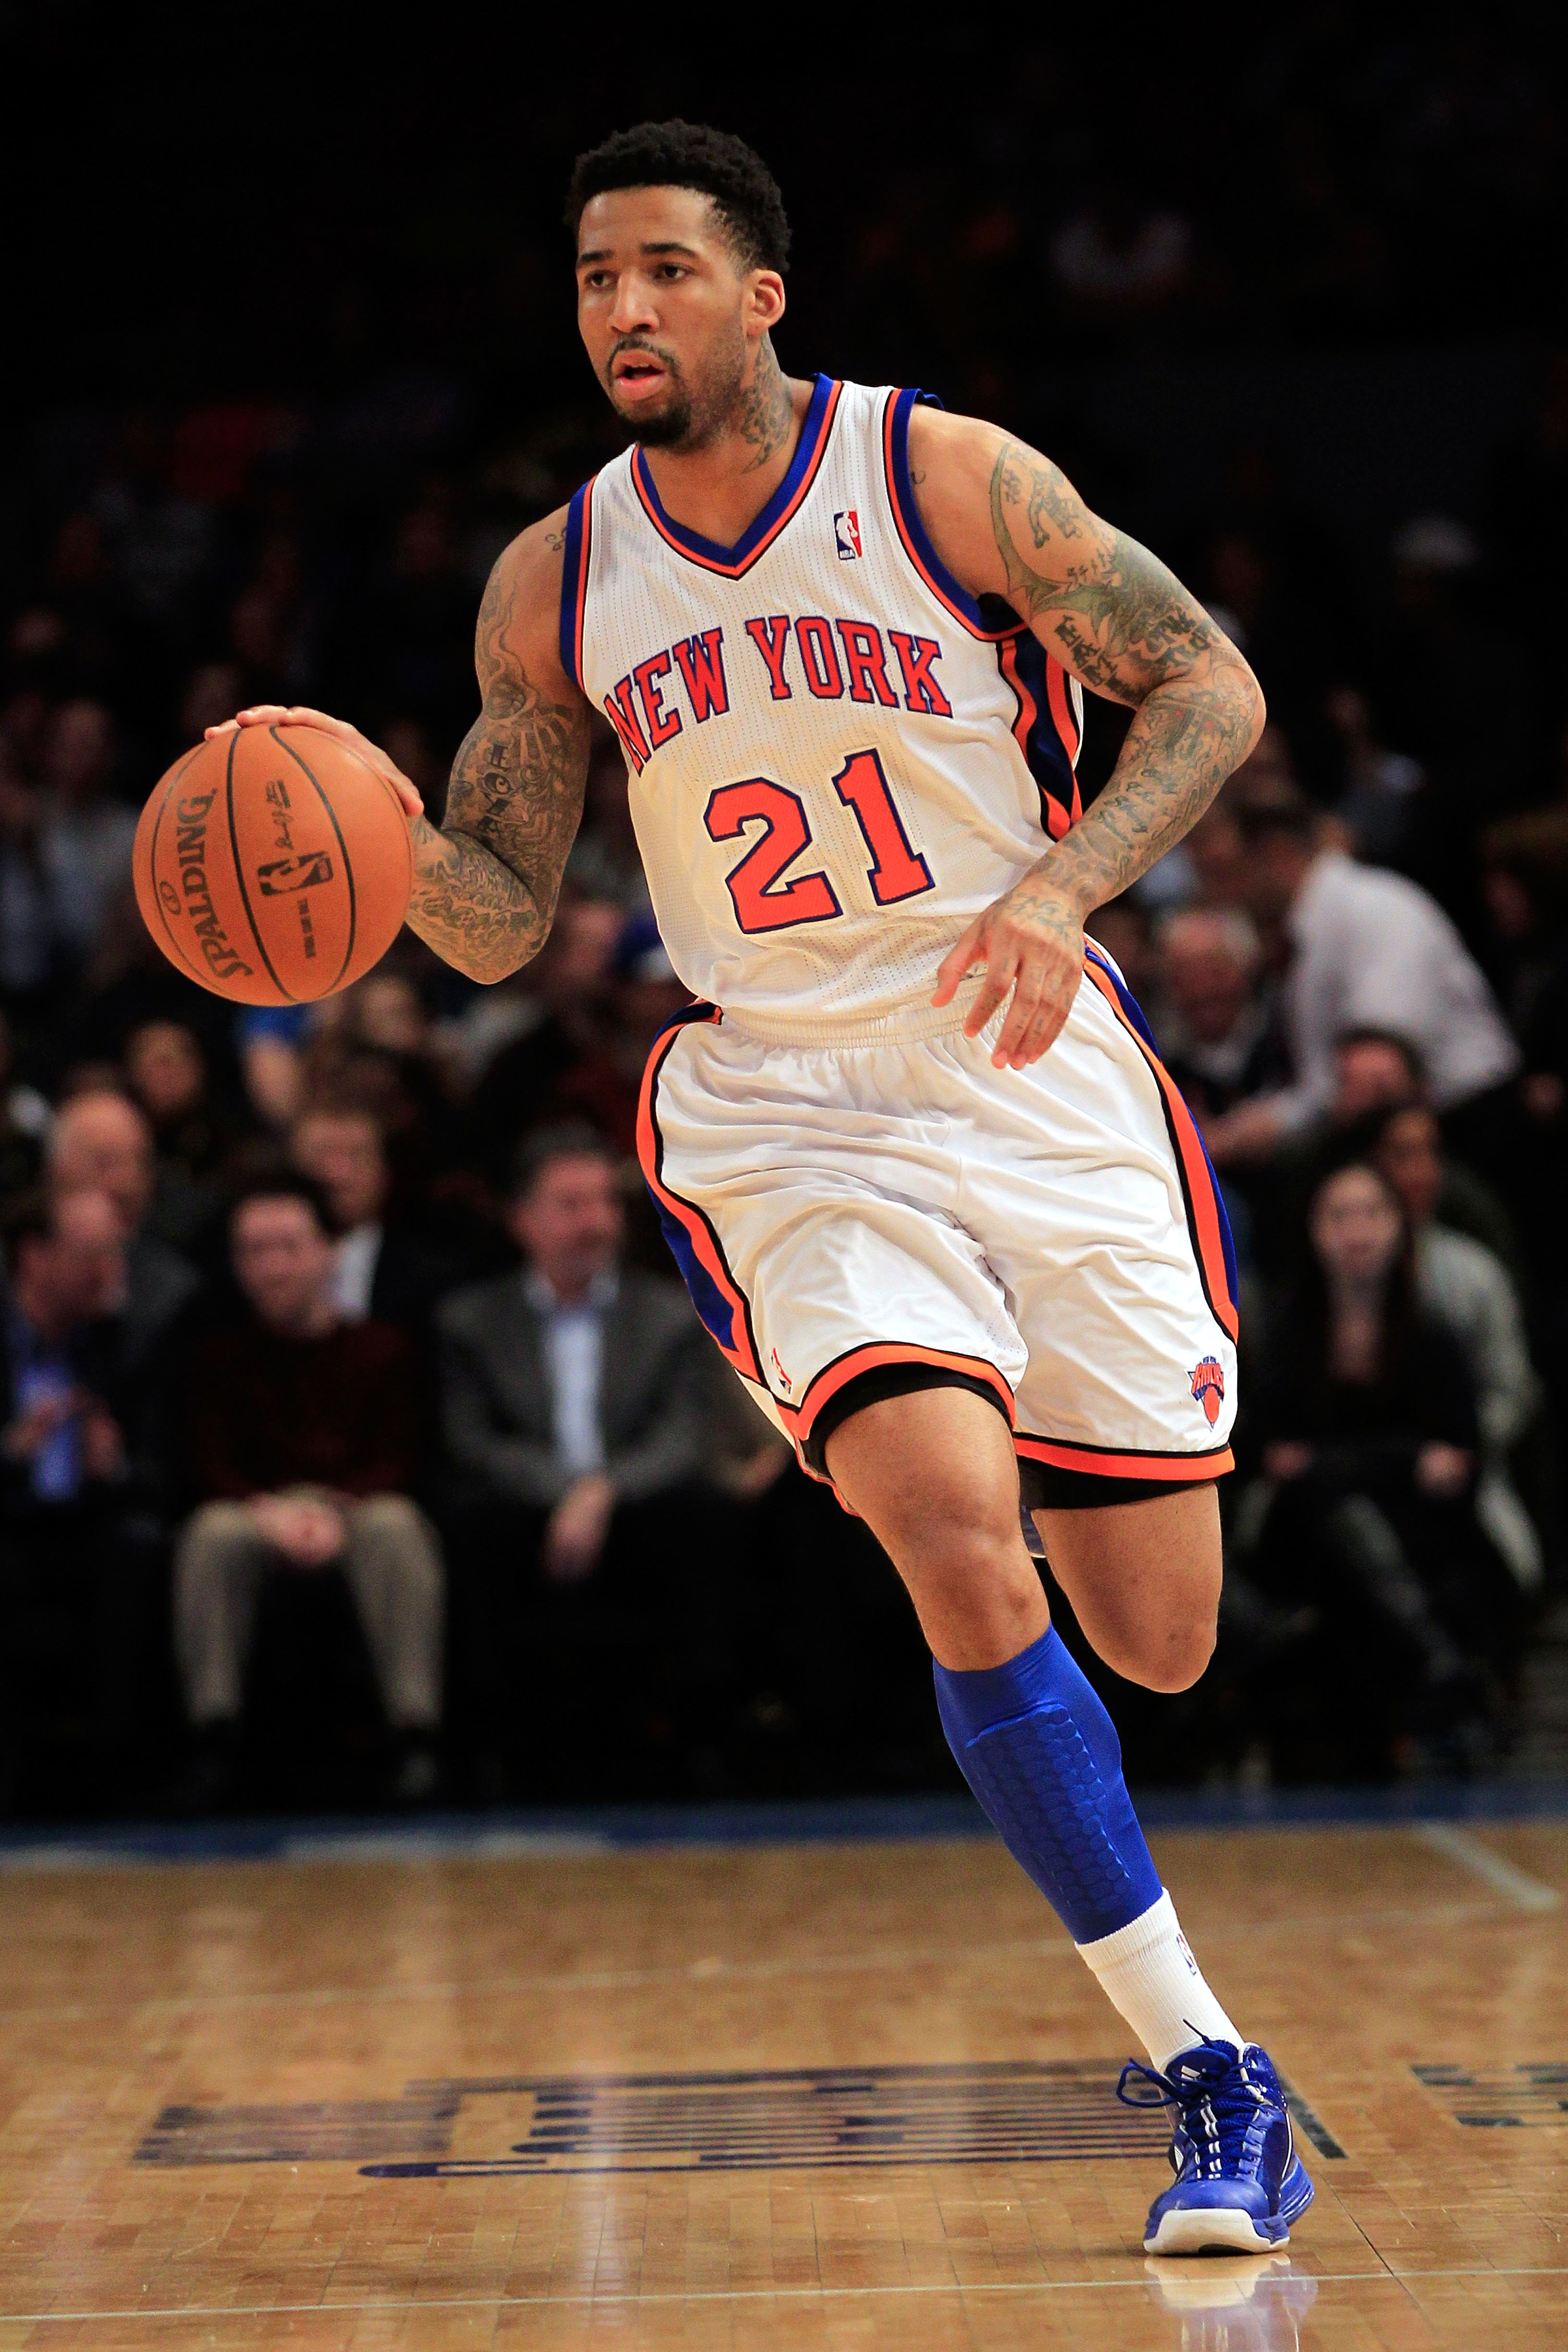 Charlotte Bobcats' Chris Douglas-Roberts shoots during the fourth quarter  of an NBA basketball game against the New York Knicks Friday, Jan. 24, 2014,  at Madison Square Garden in New York. The Knicks